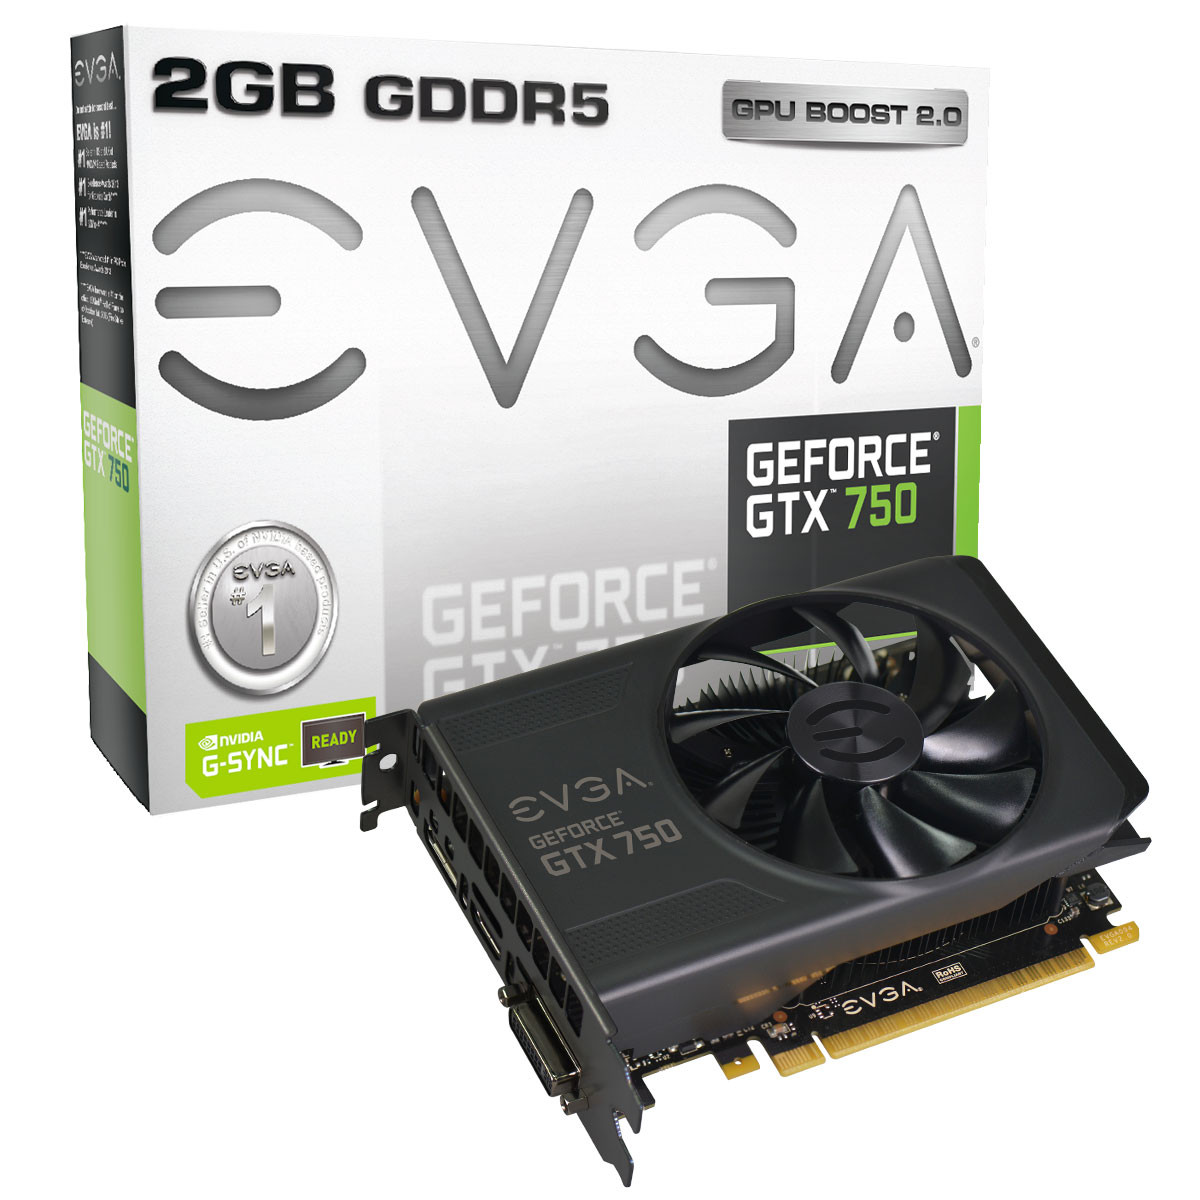 GeForce GTX 750 Graphics Card with 2 GB VRAM Launched by EVGA